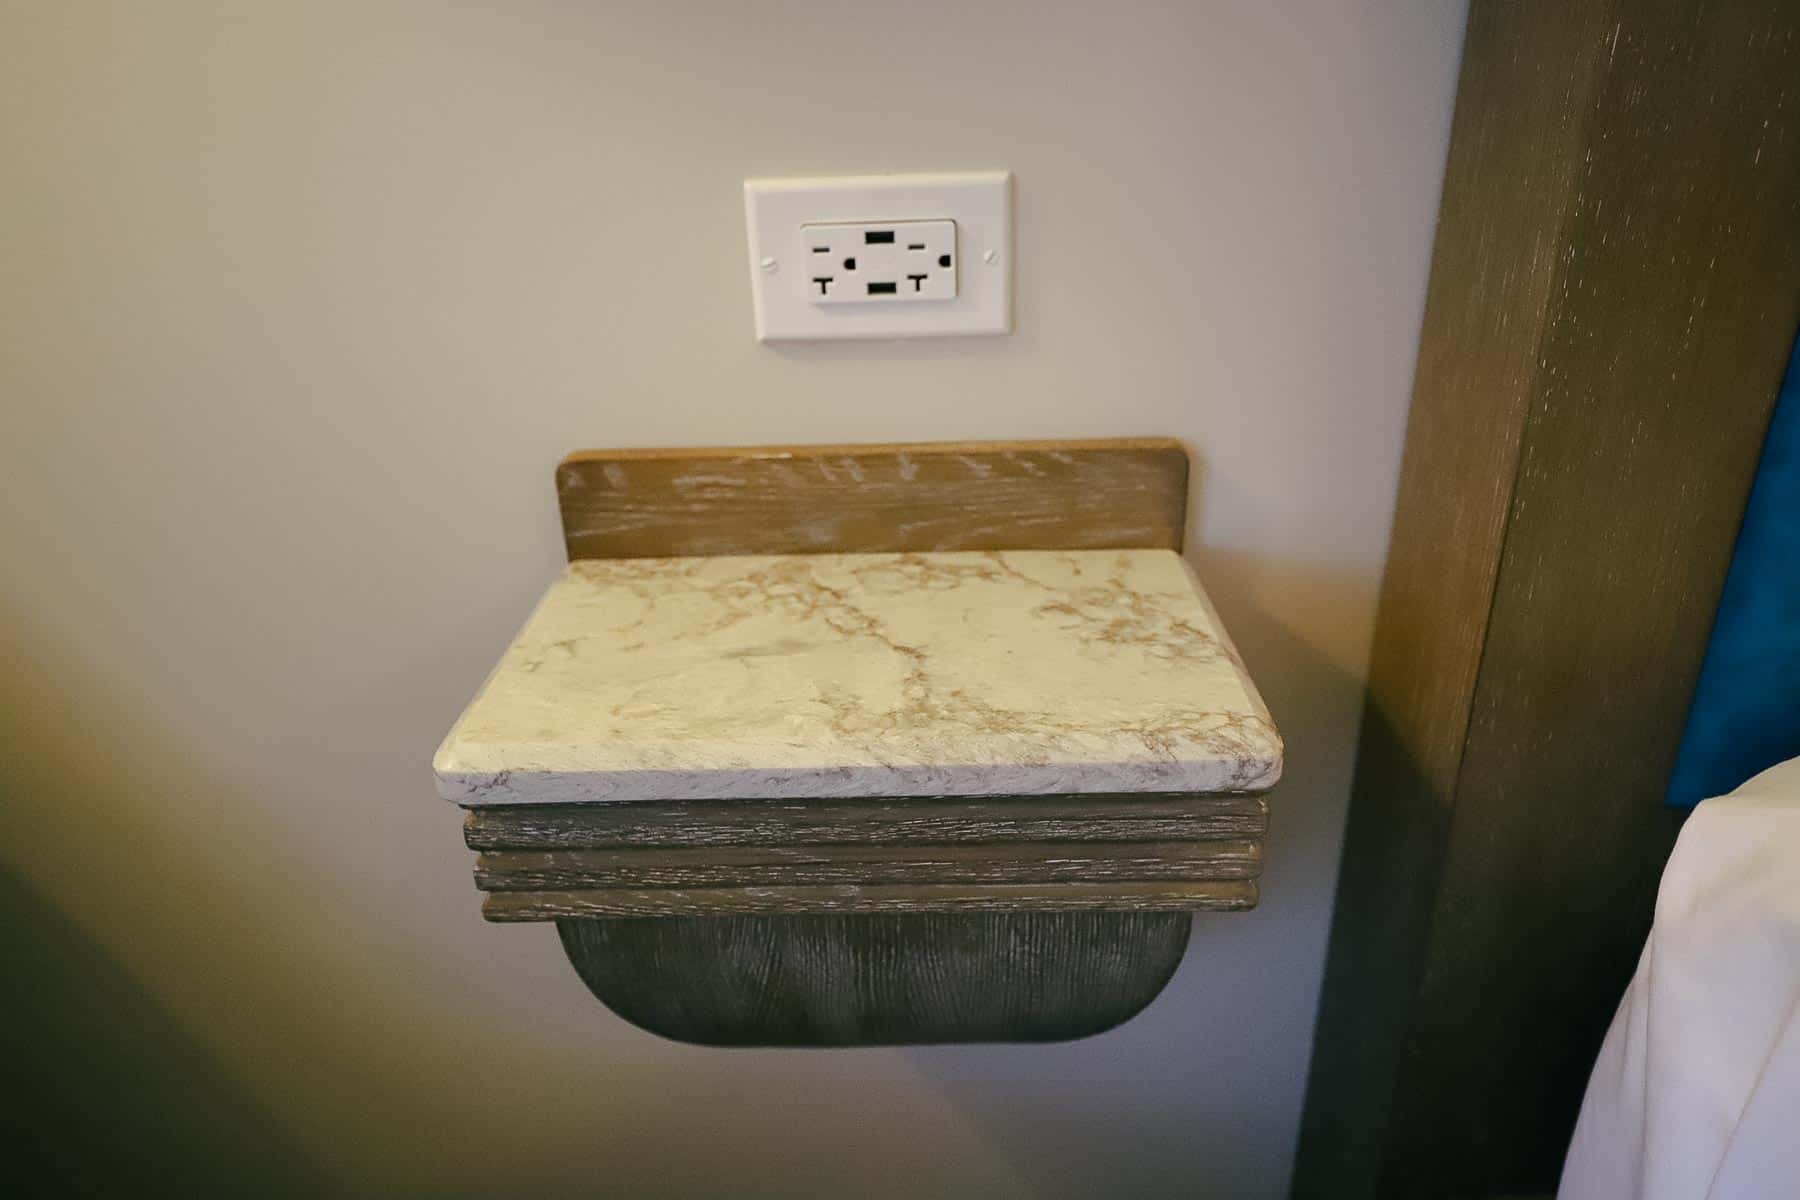 a small shelf to place mobile phone beside the bed while sleeping or charging